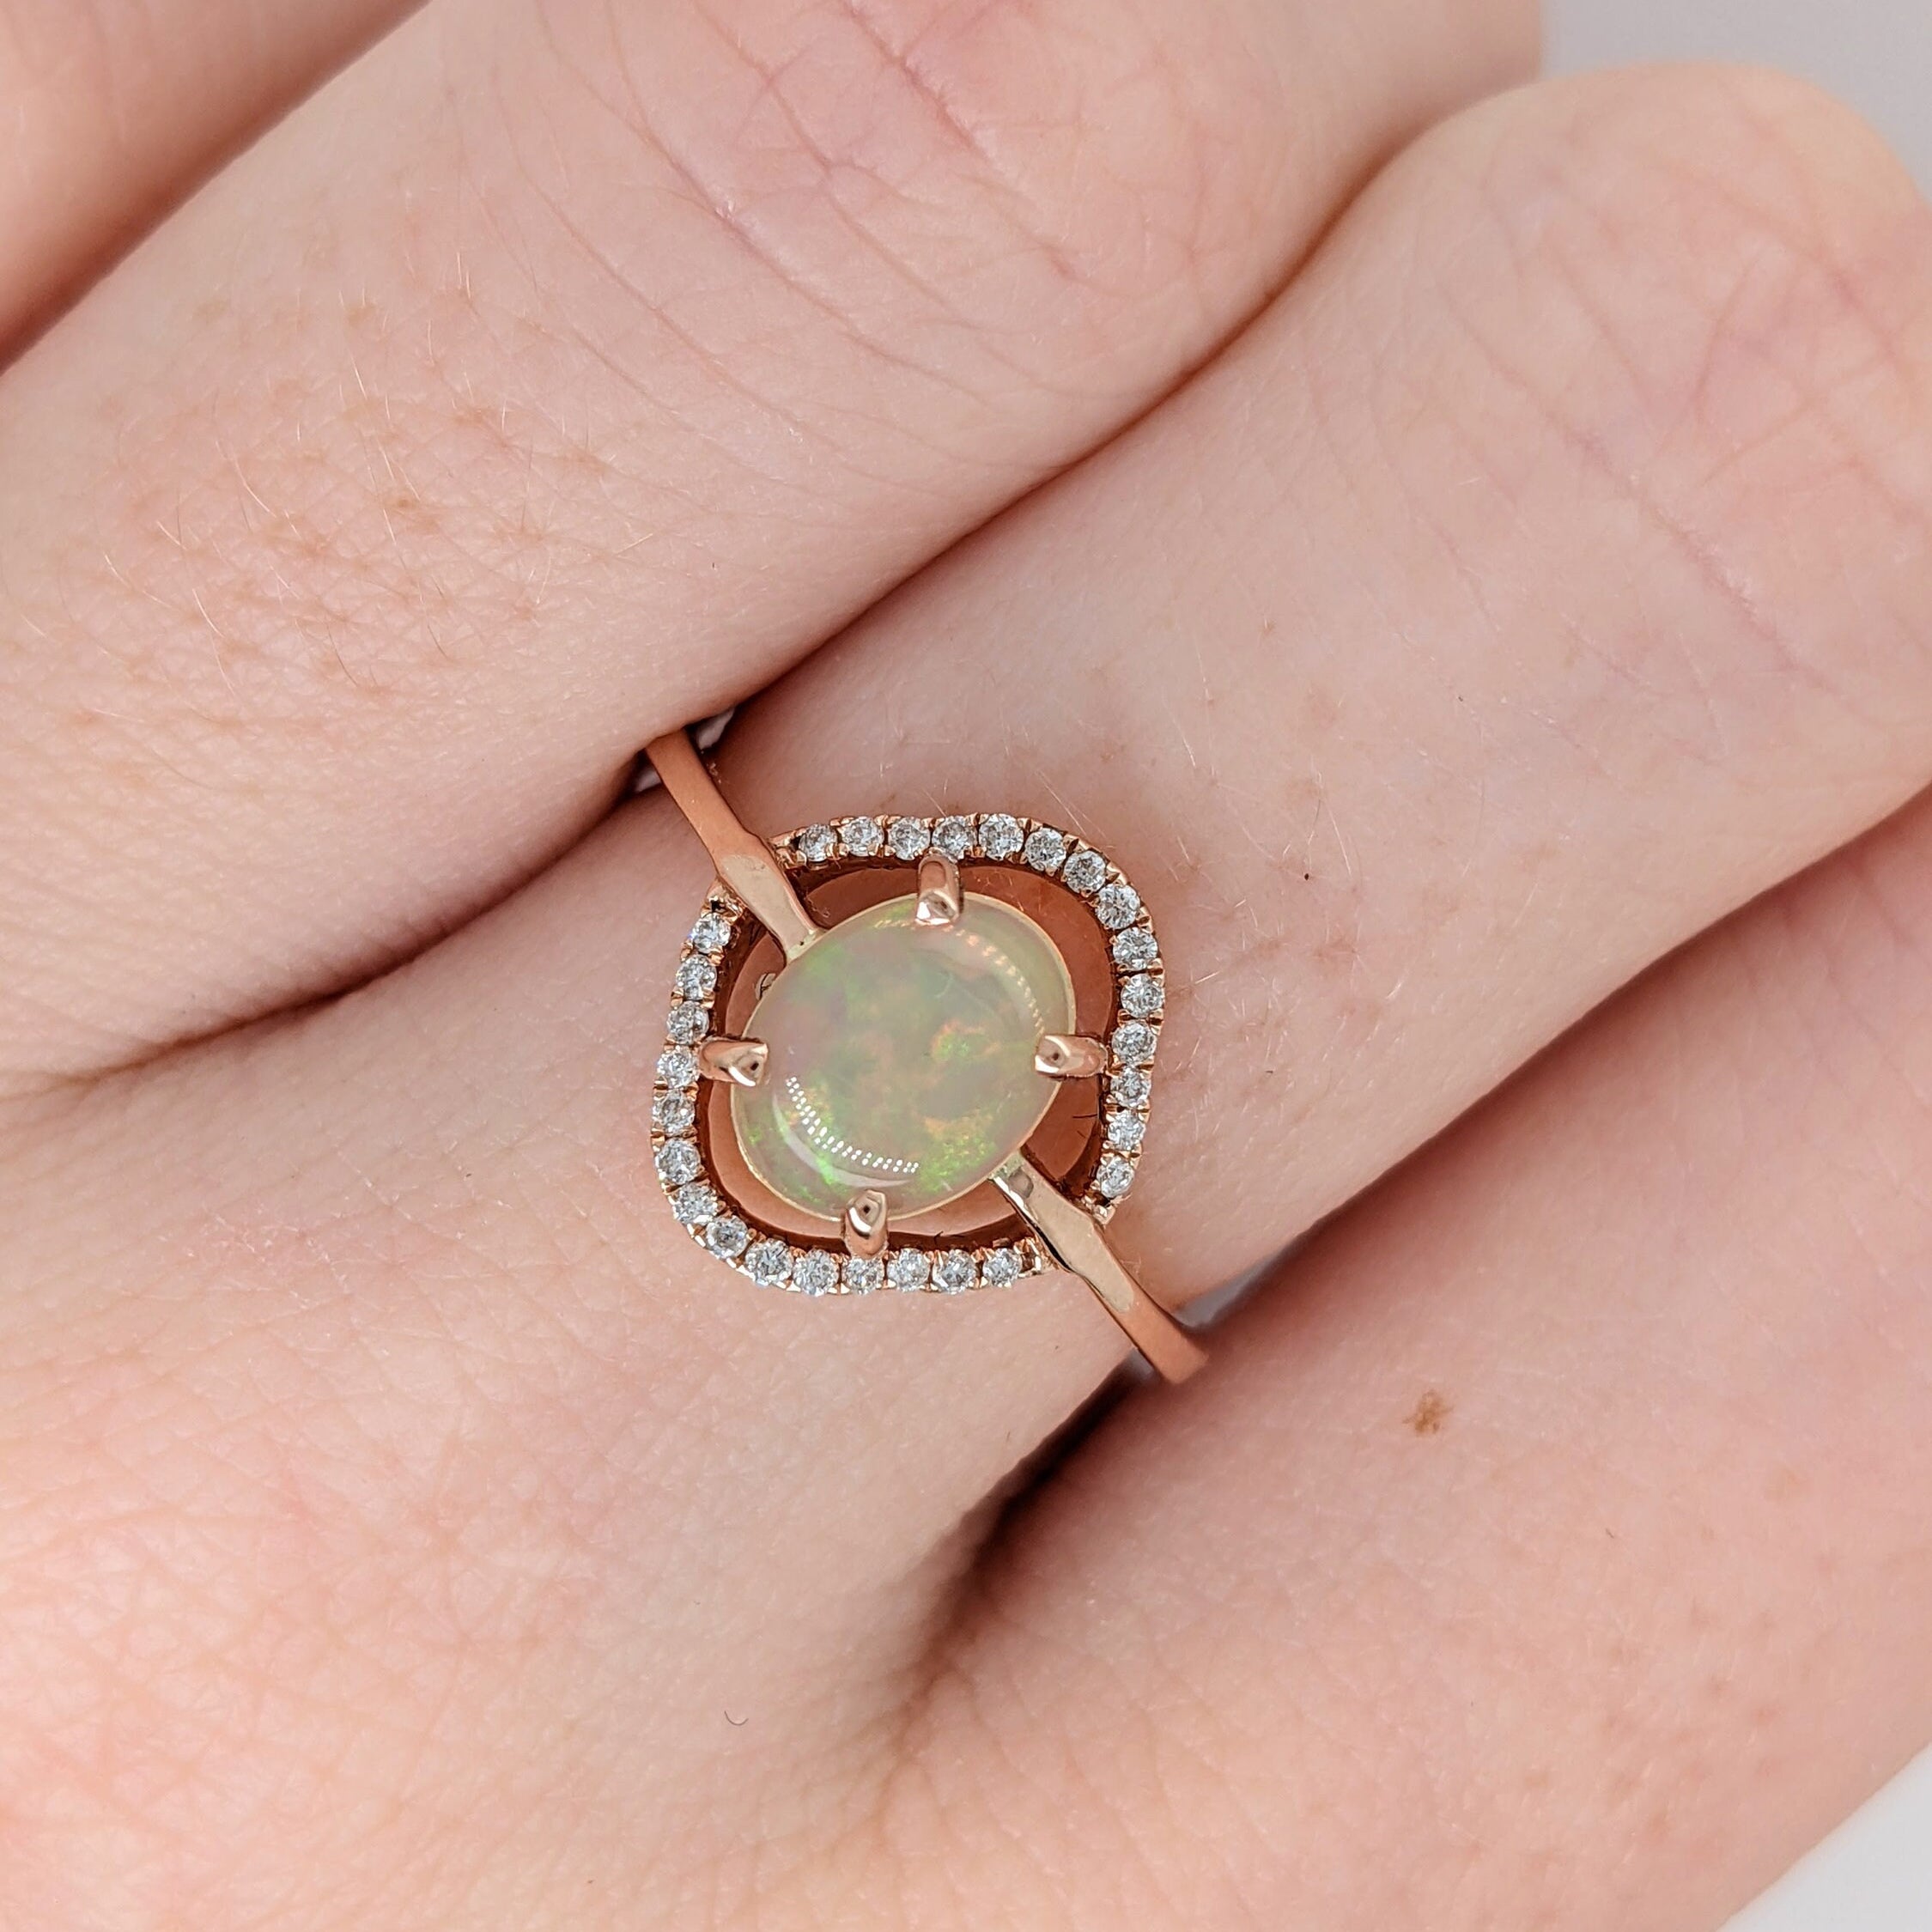 Statement Rings-Jelly Opal Ring w Diamond Halo in Solid 14k Rose Gold | Oval 8x6mm | Gemstone Jewelry | October Birthstone | Play of Color - NNJGemstones